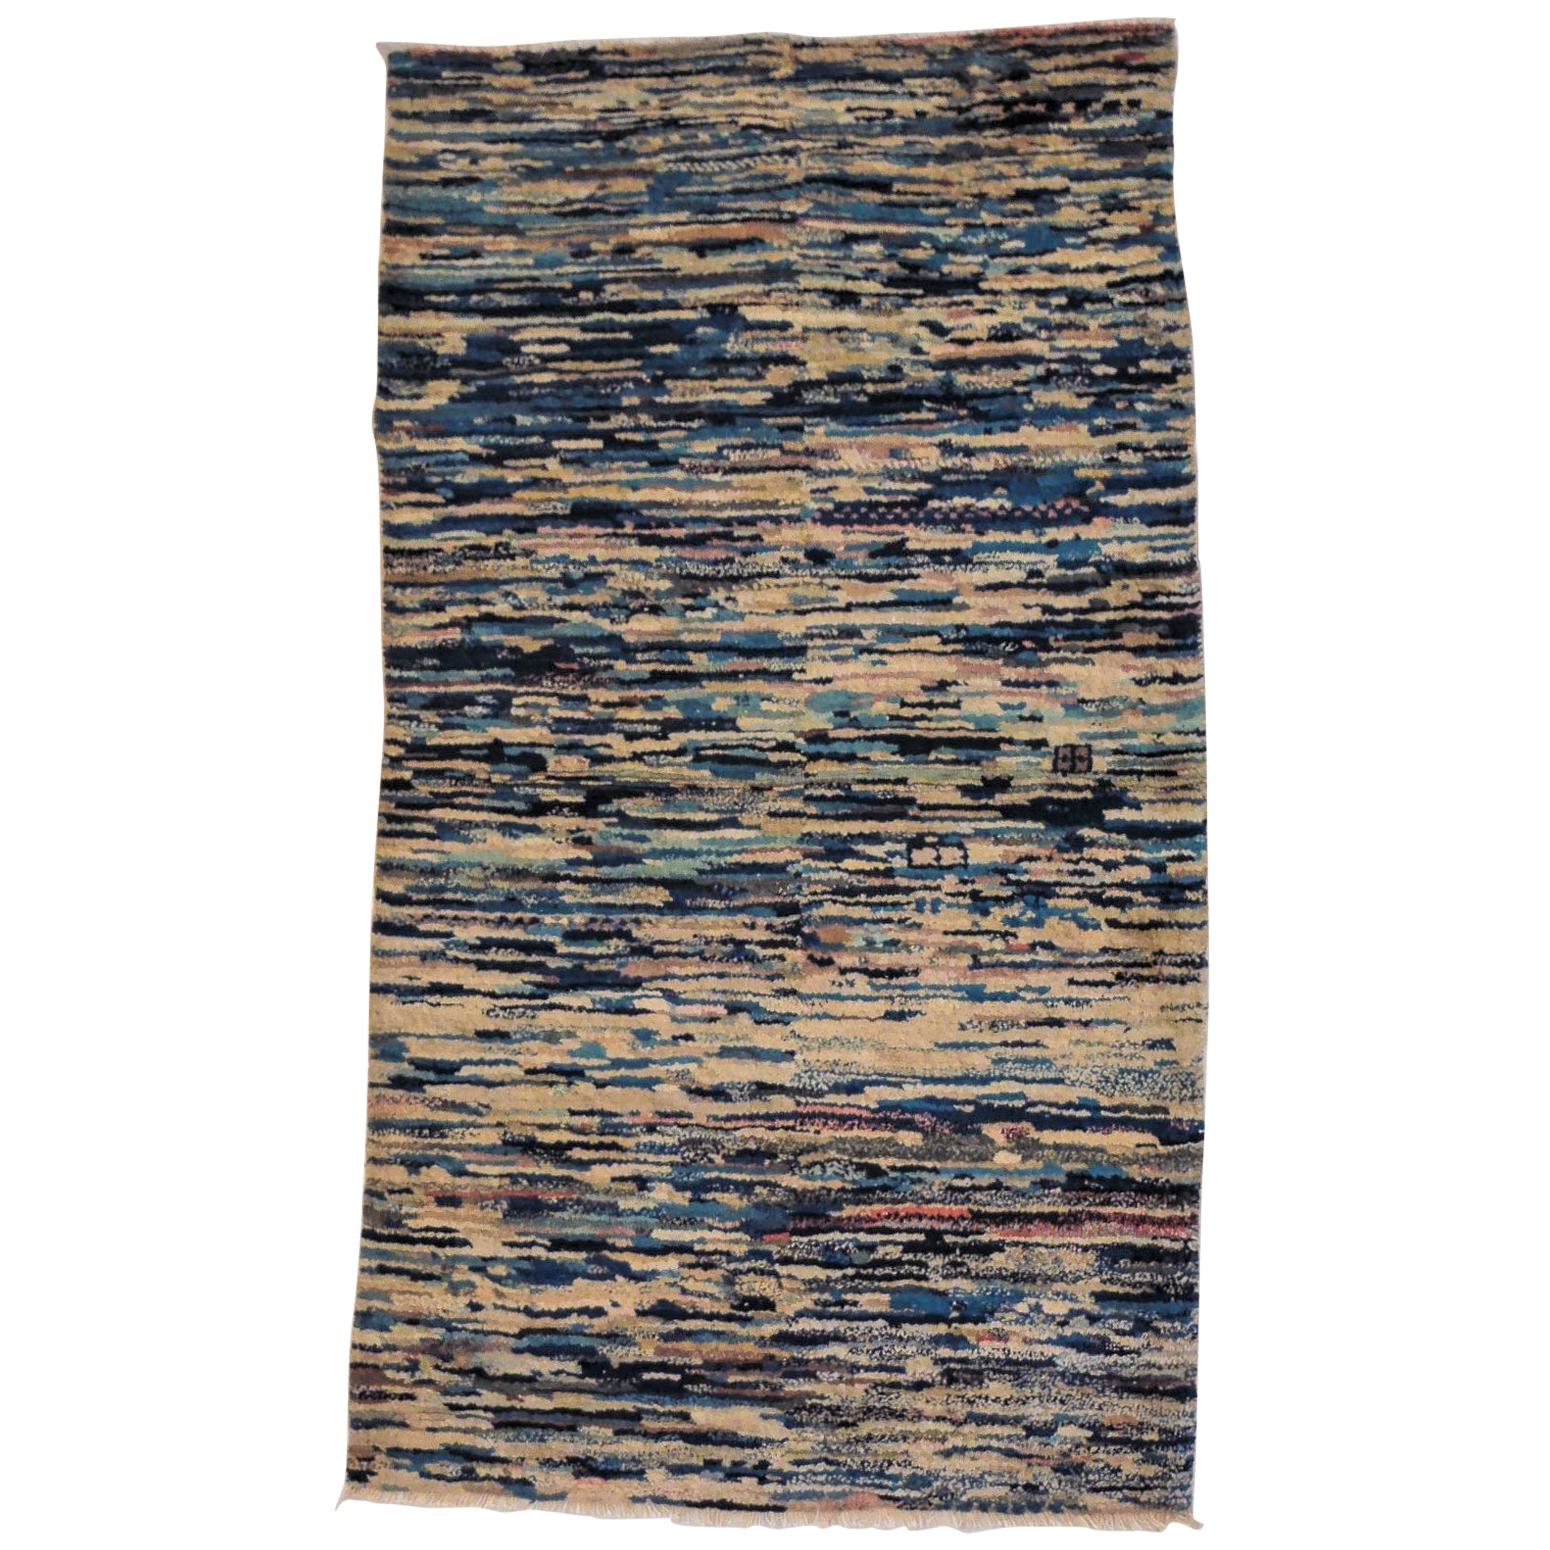 20th Century Blu White Multicolored Tibetan Yuran Rug Hand Knotted Wool, 1960s For Sale